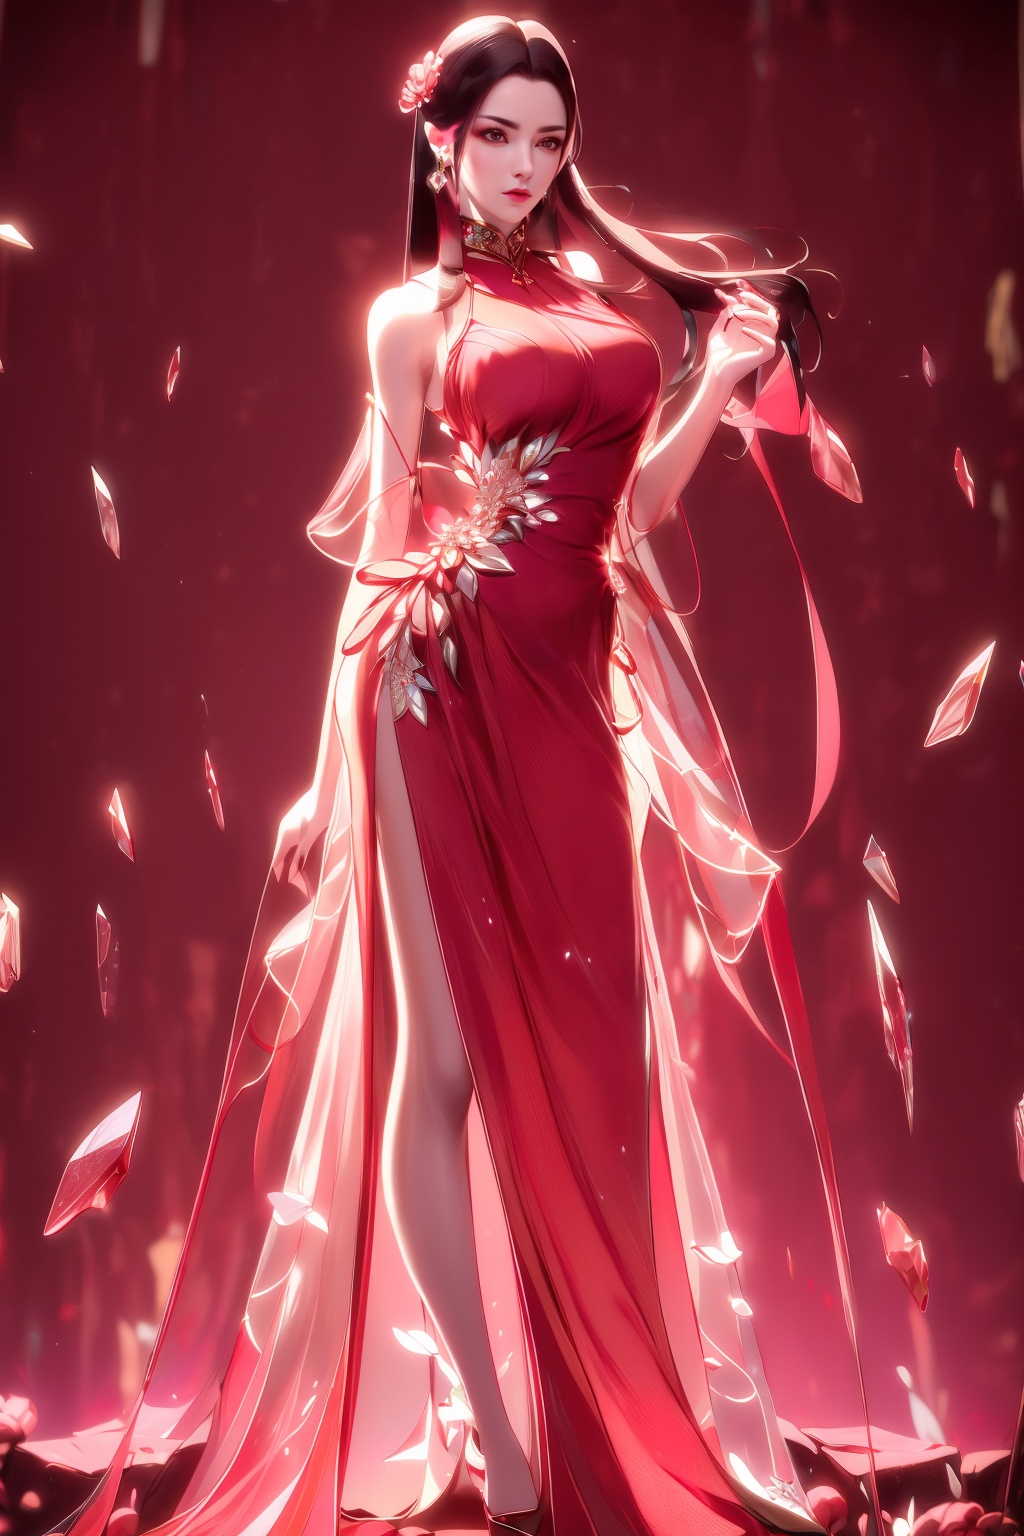 Masterpiece, top quality, 1 girl, hanfu, Summer clothes, exquisite details, sheer dress, Sexy, high quality, 8k,(Red) Dress,red dress, Long Black Hair,  Beautiful Custom Figure,(1 Girl), (Delicate and Gorgeous Crystal:1.4) , 
(Peonies blossom background:1.4),houtufeng,yuyao,meimo,mds-hd